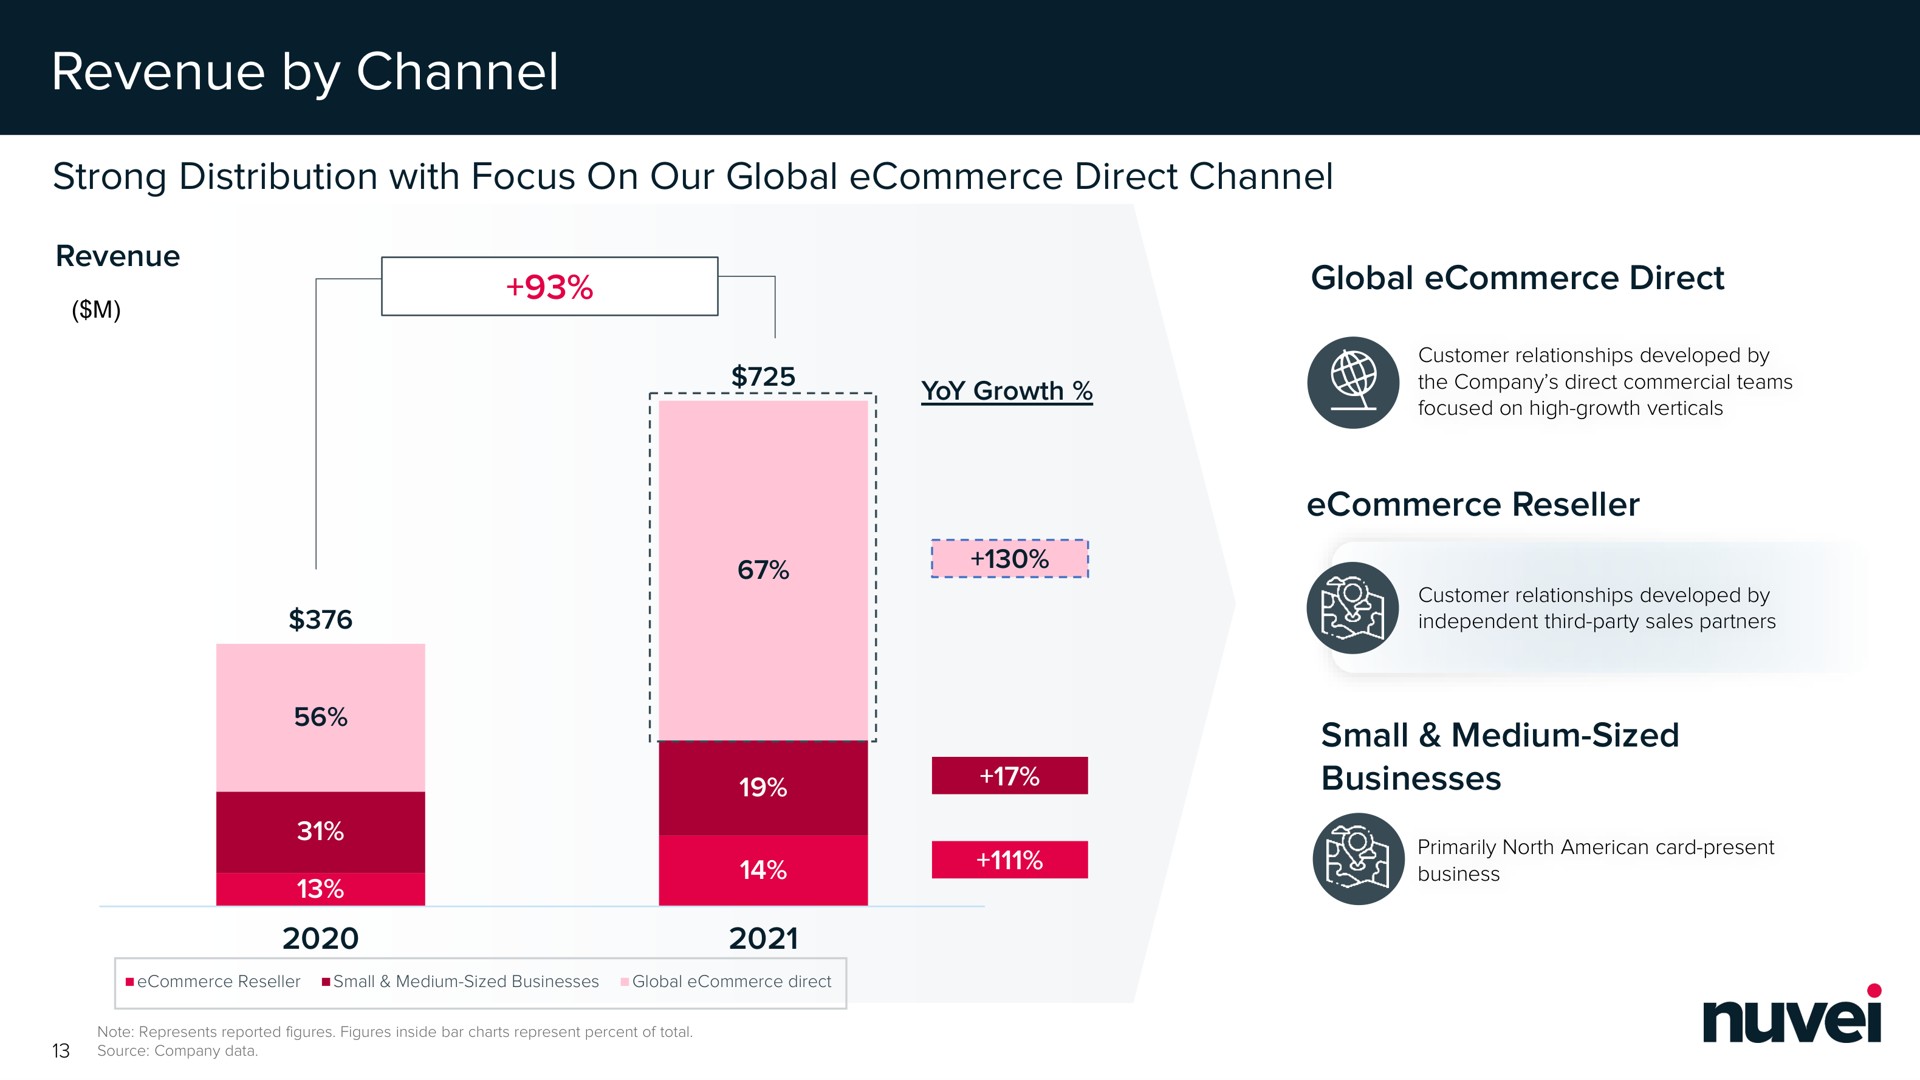 revenue by channel | Nuvei